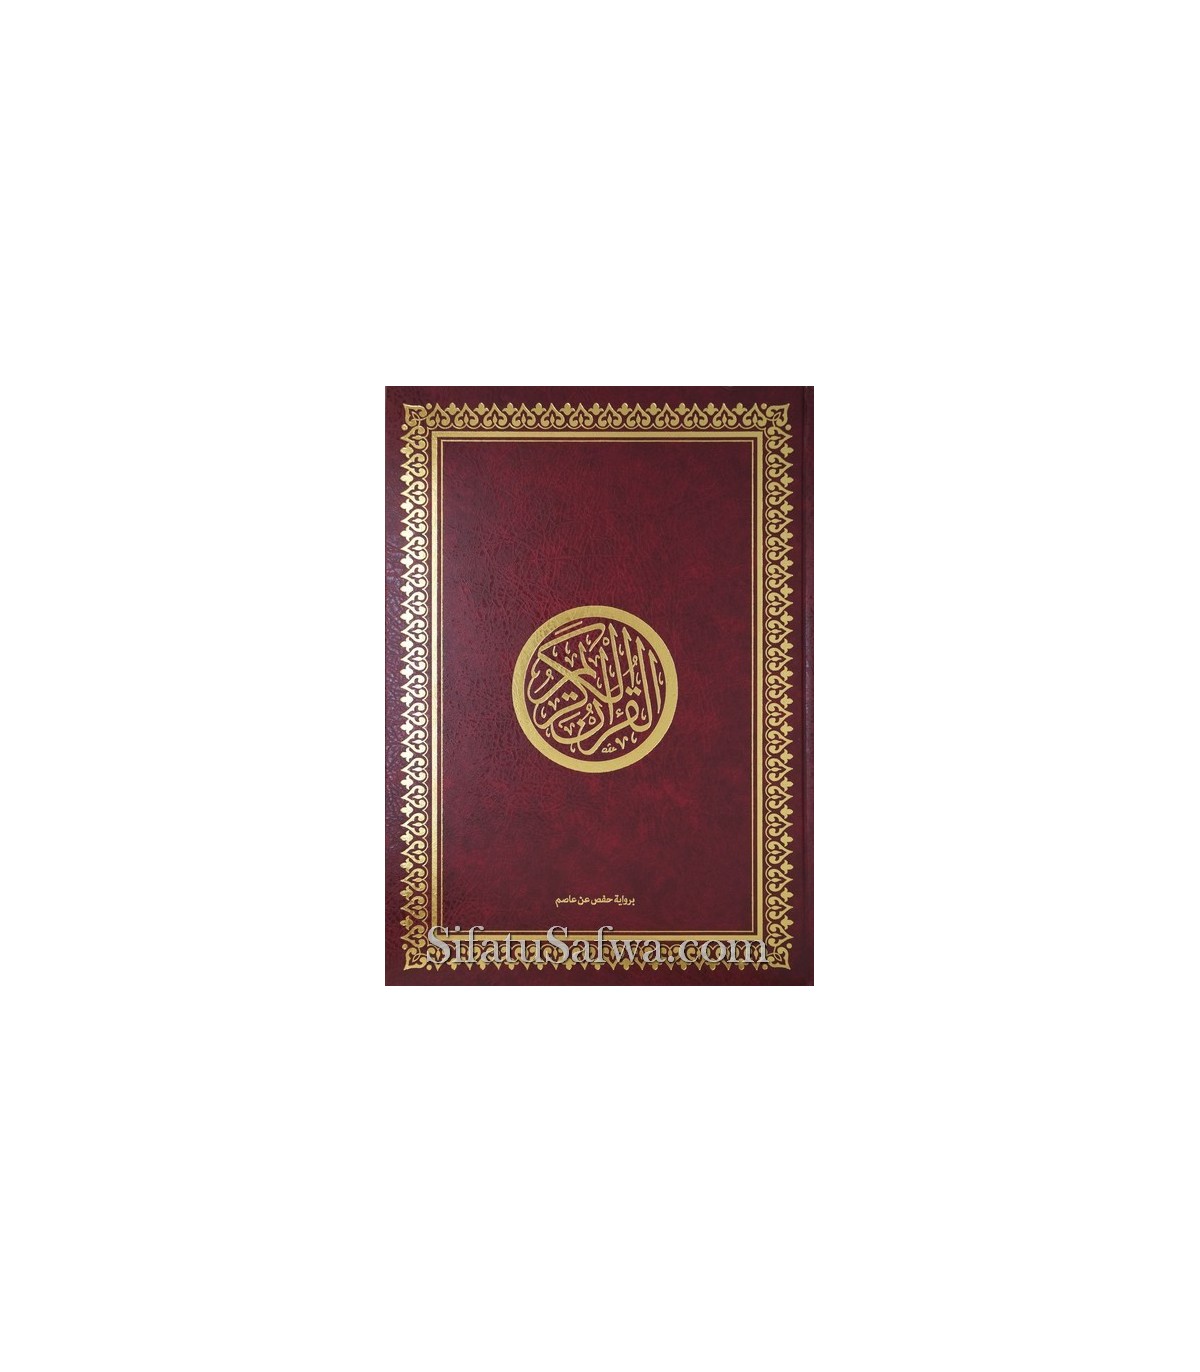 Quran Giant Format - Finishing Red Leather and Gilding (35x50cm)